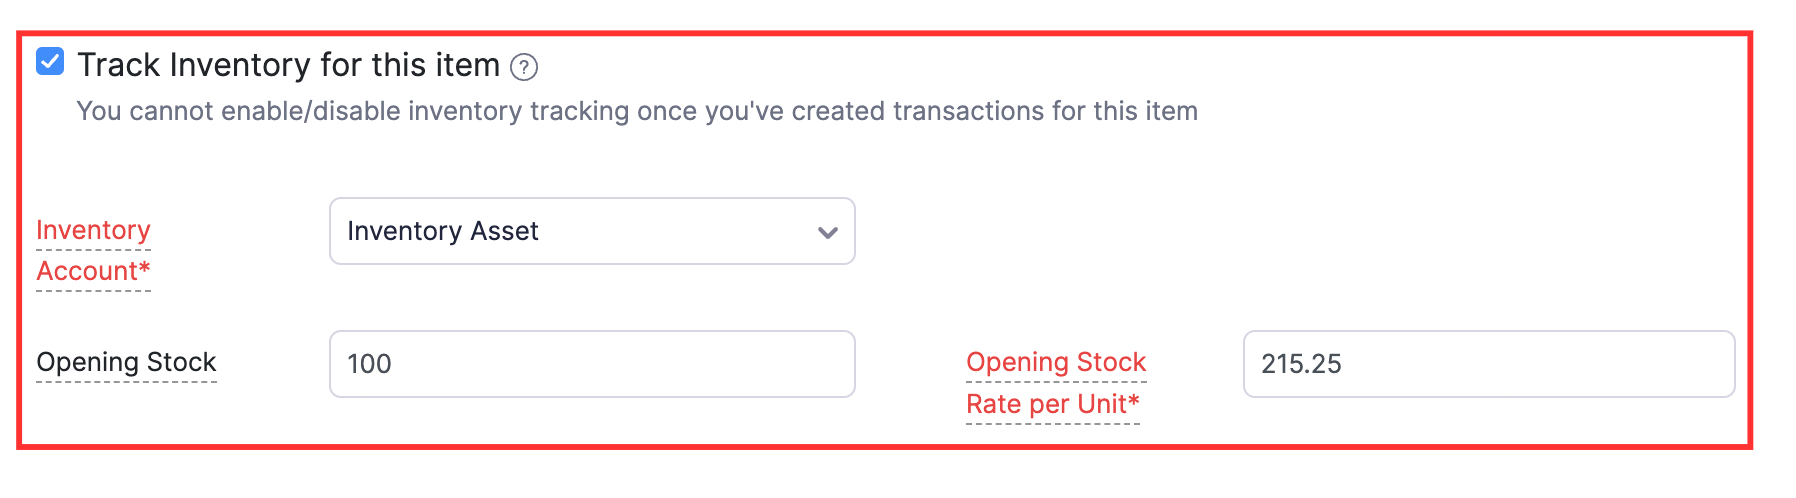 Enter the 'Opening Stock' and 'Opening Stock Rate per Unit'